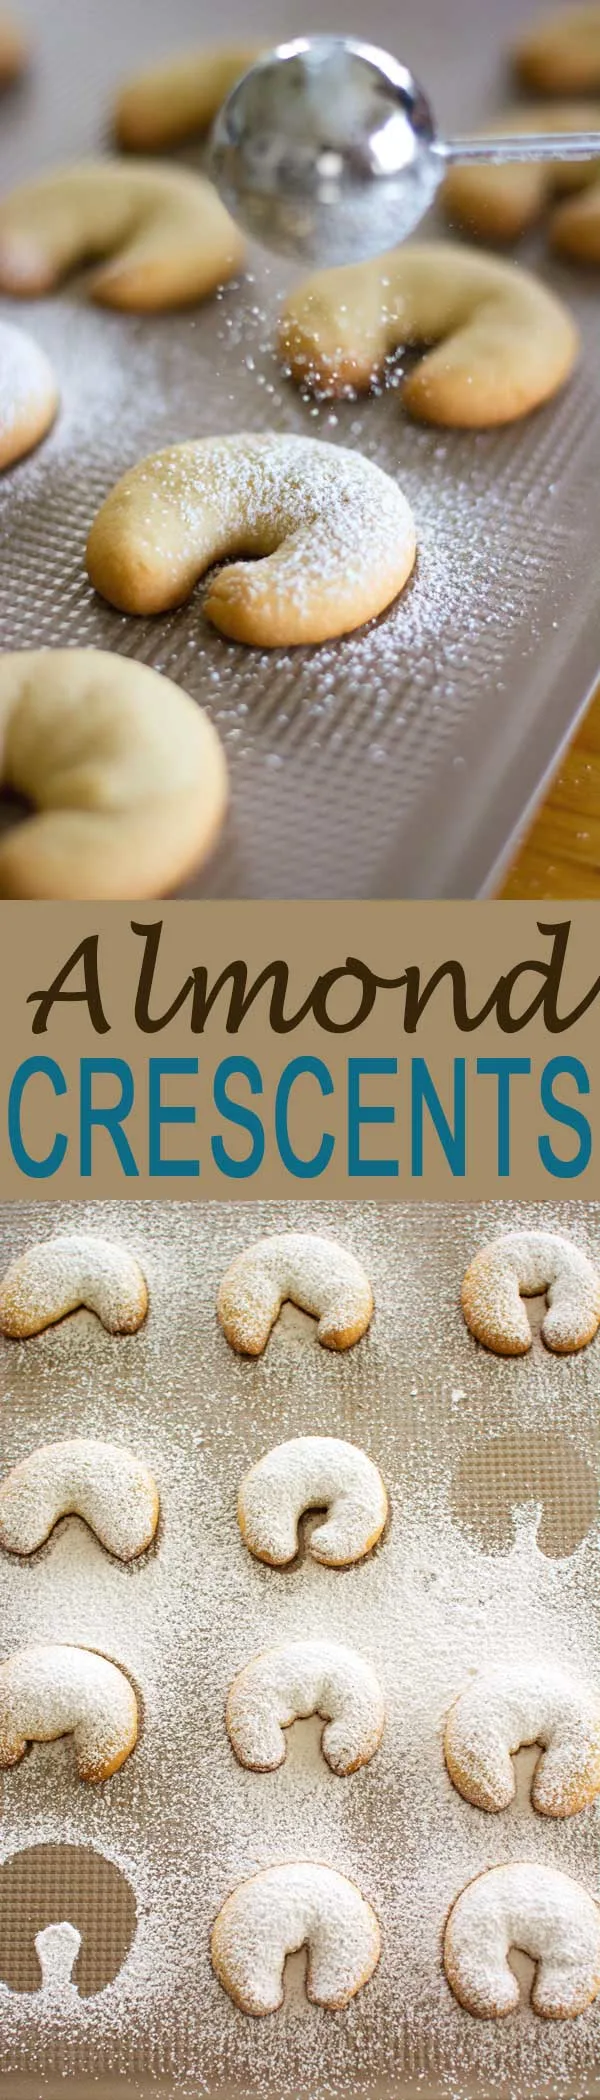 Almond Crescent Cookies (Vanille Kipferl) are popular German Christmas cookies dusted with powdered sugar. Best dessert made during the holidays with family! #christmascookies